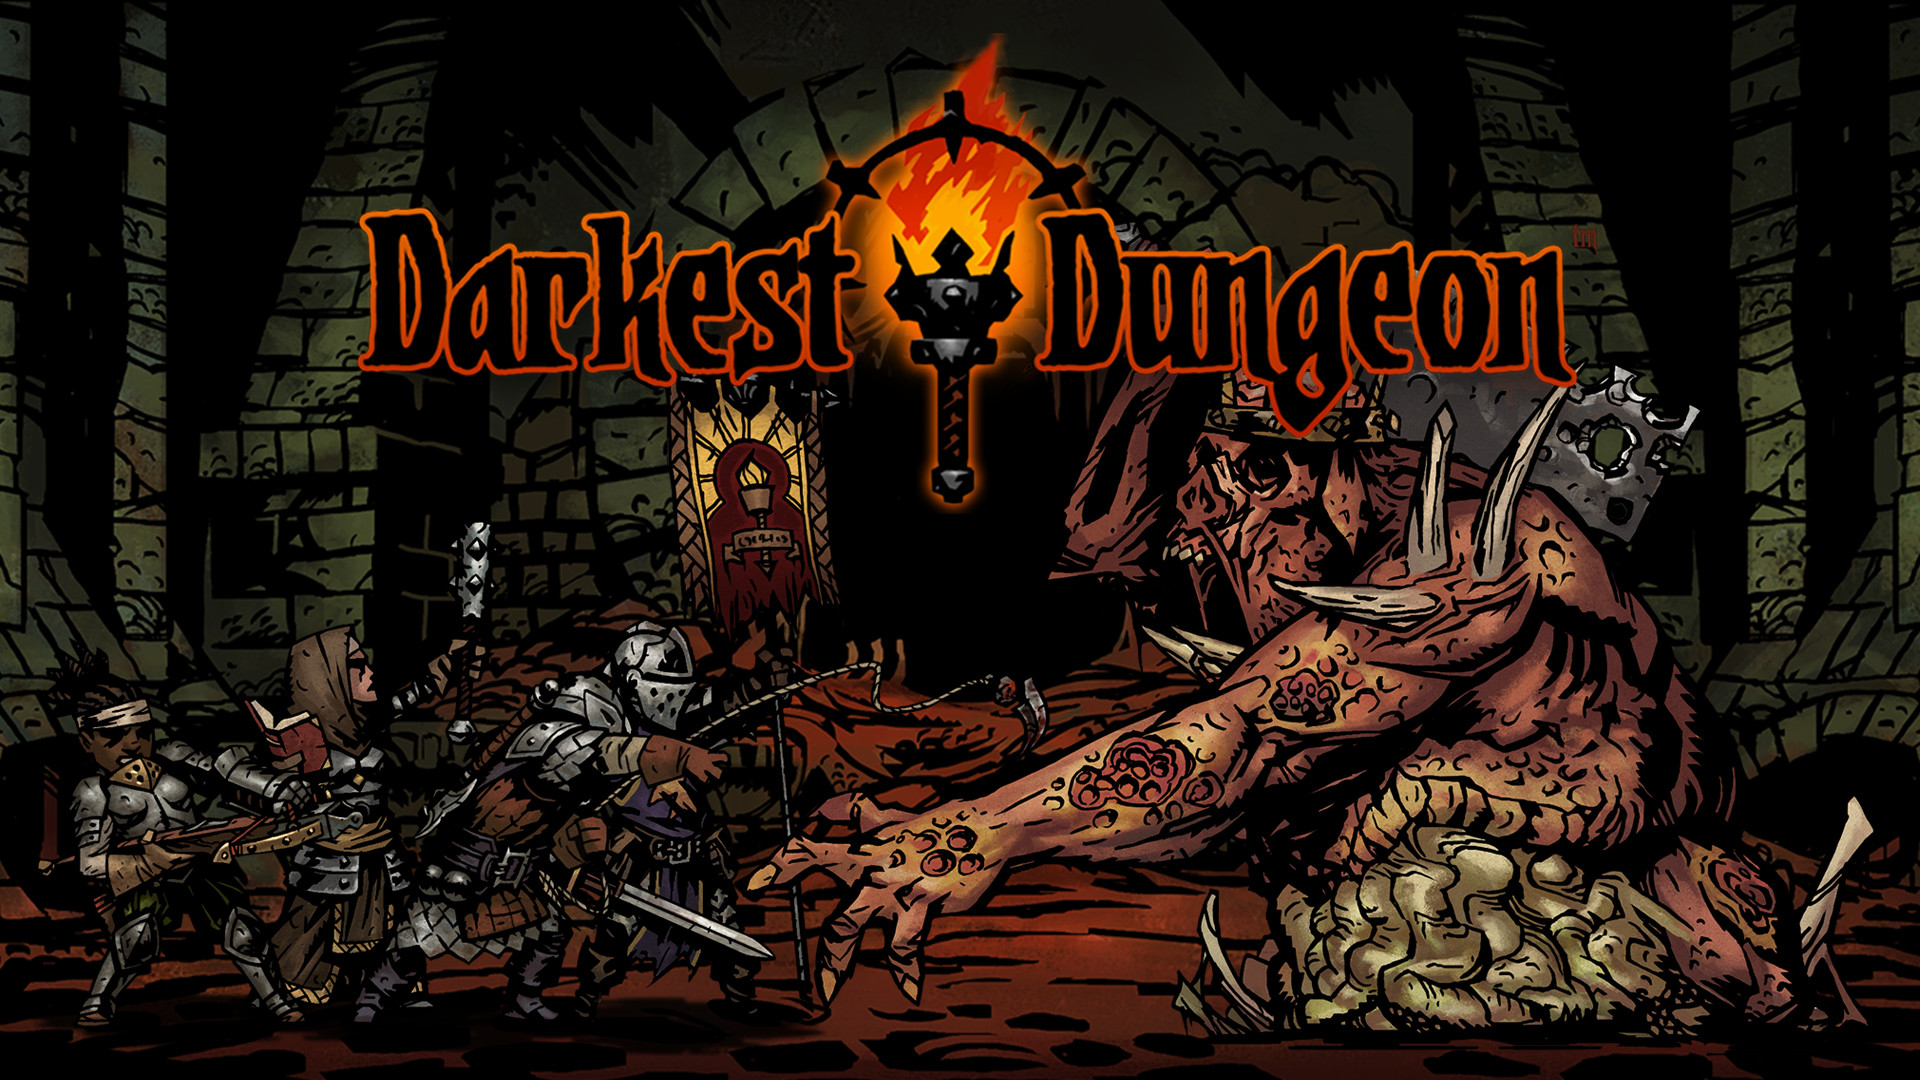 how to sound like the narrator from darkest dungeon